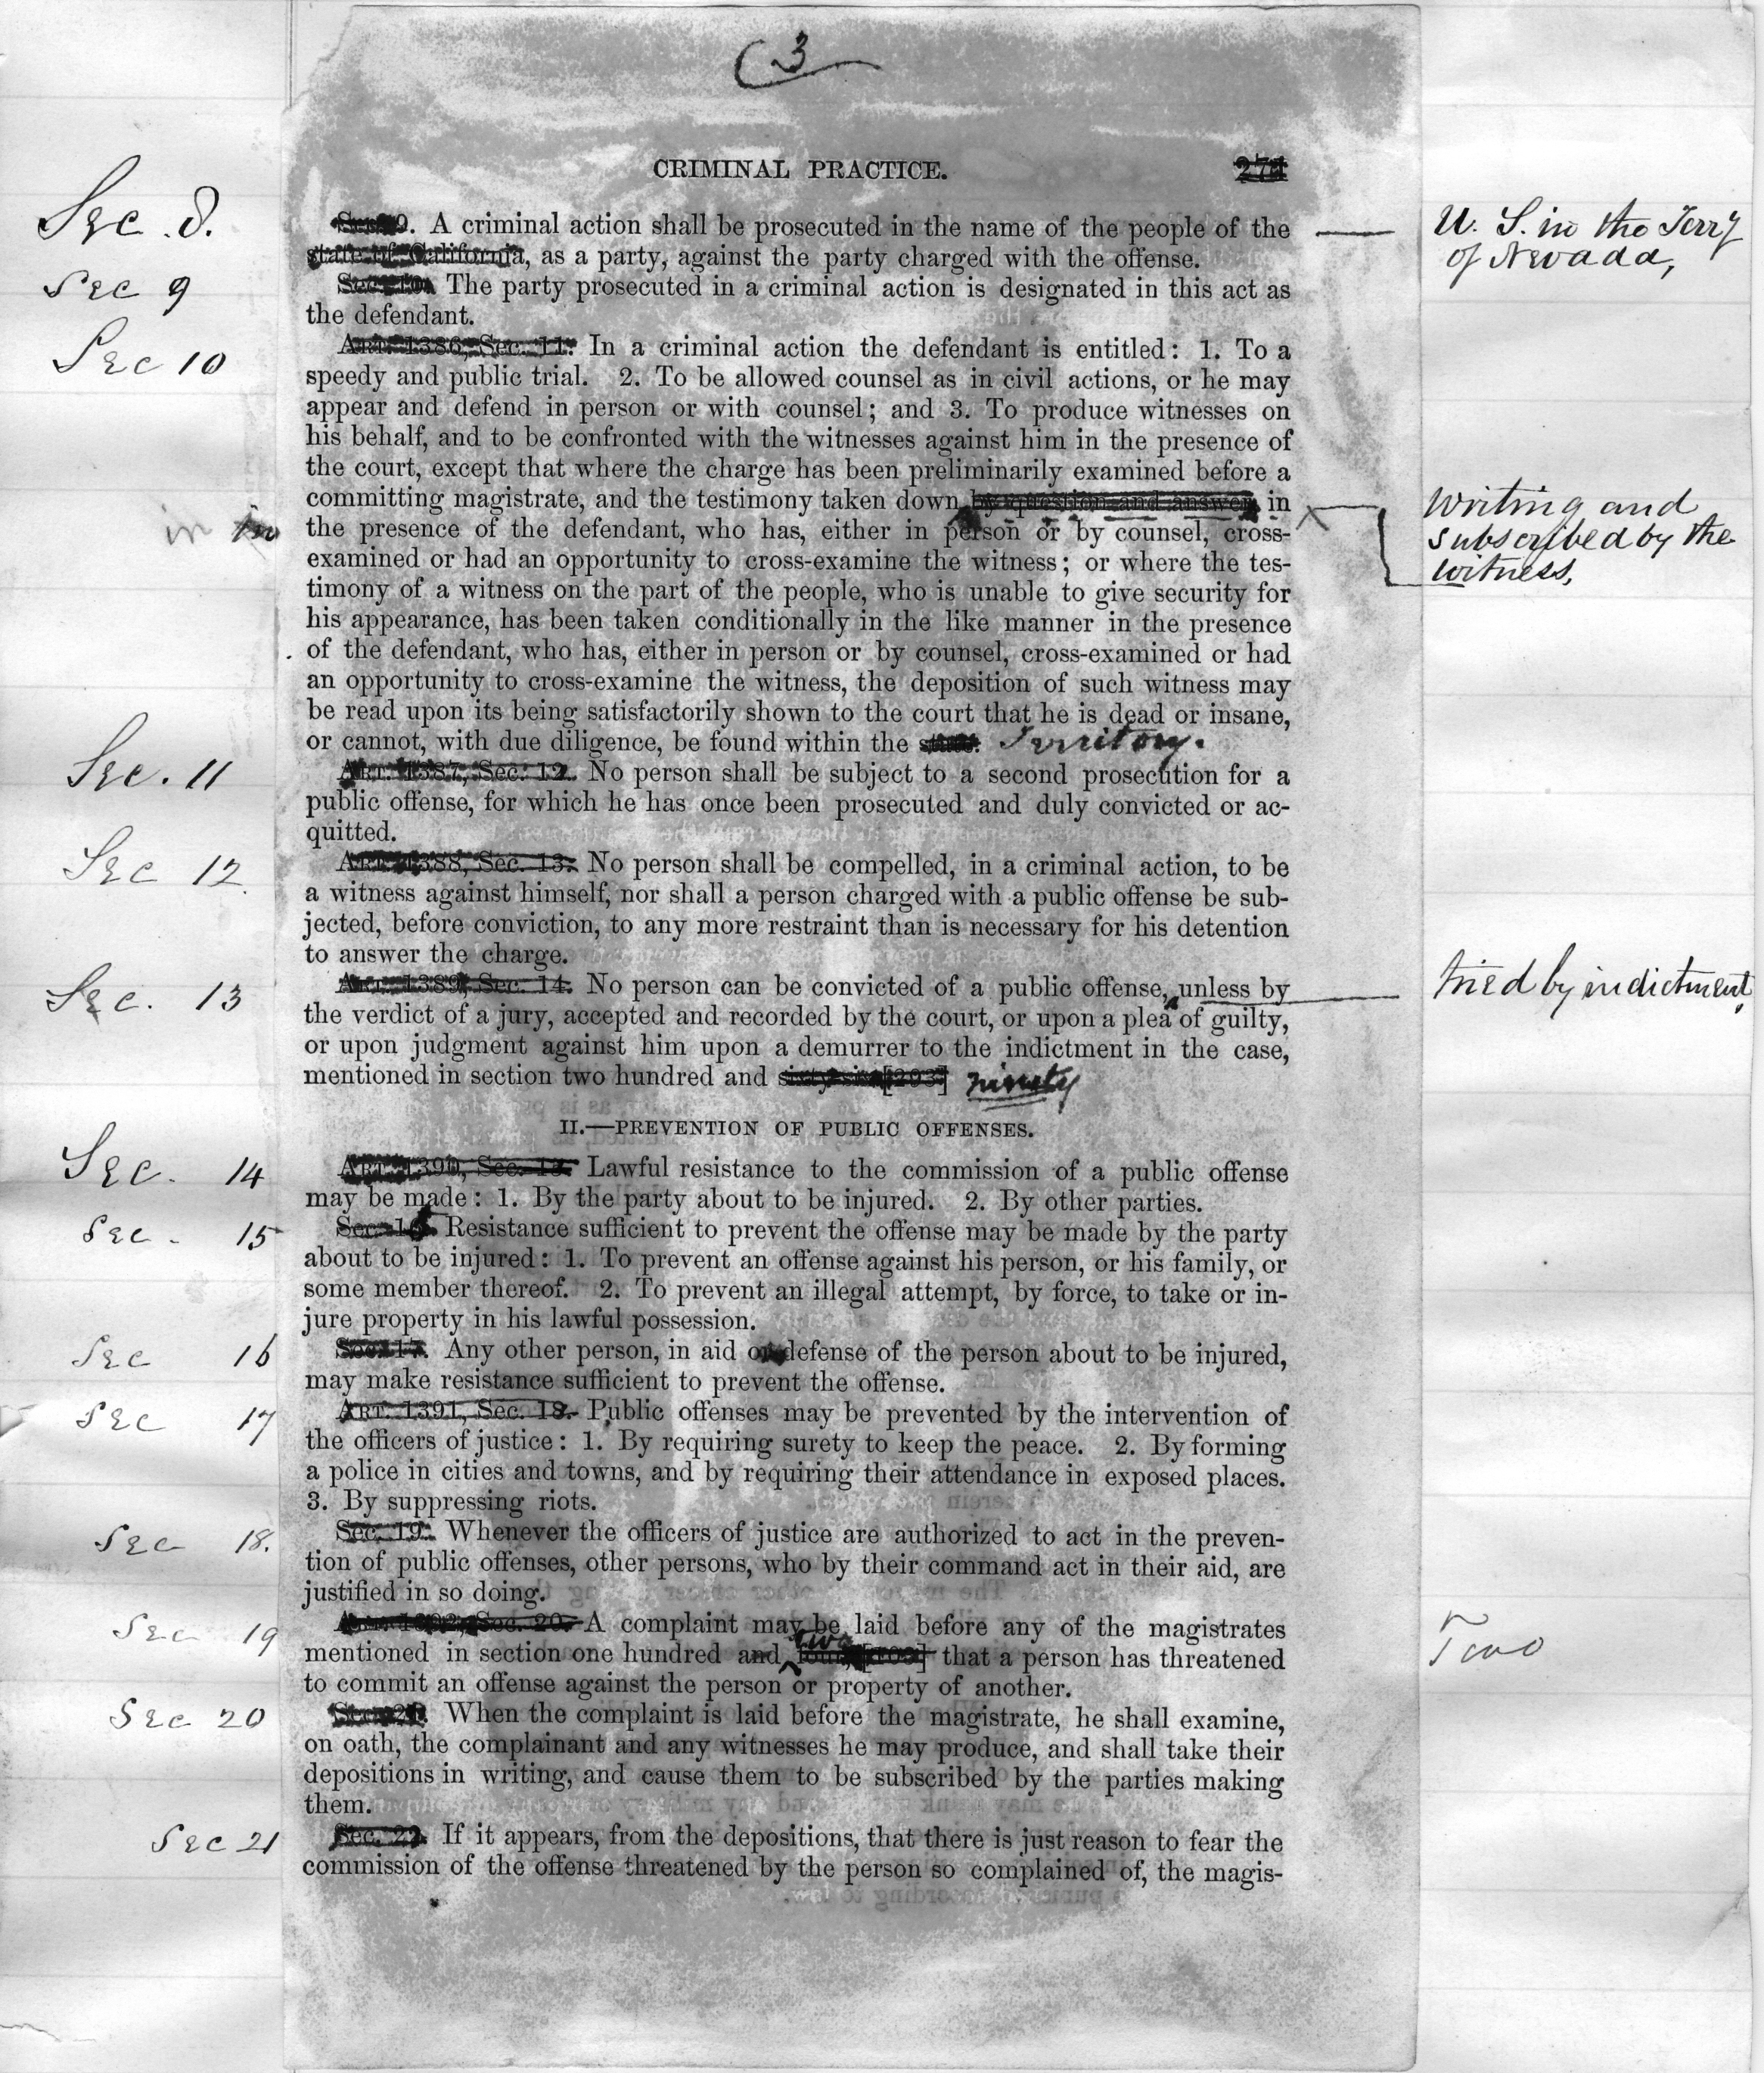 Detail from Council Bill 21, First Territorial Legislative Session (1861), Nevada State Library, Archives and Public Records.